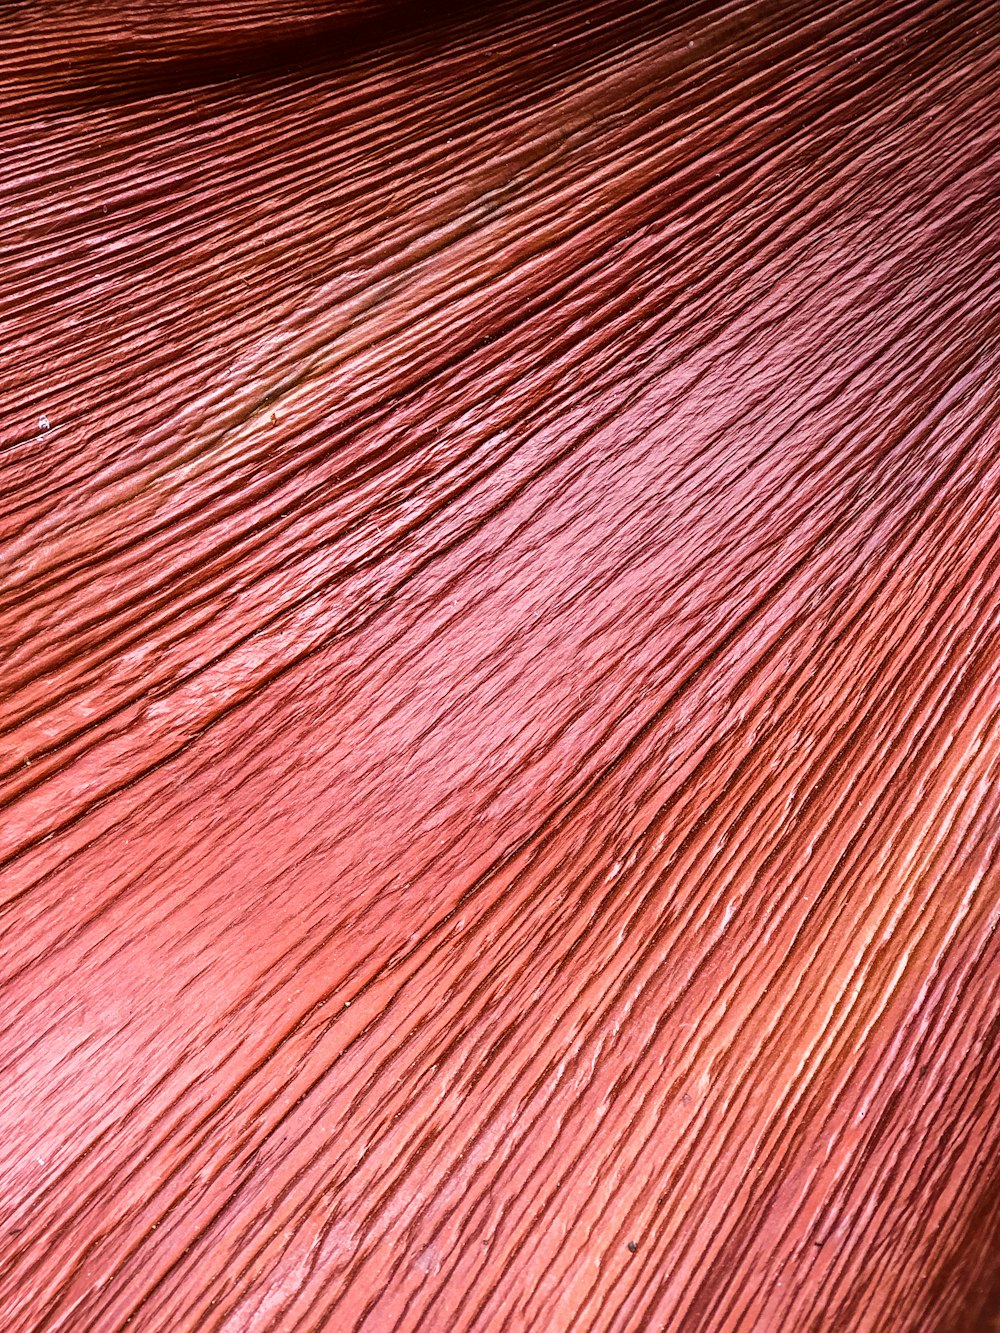 a close up of a red hair texture